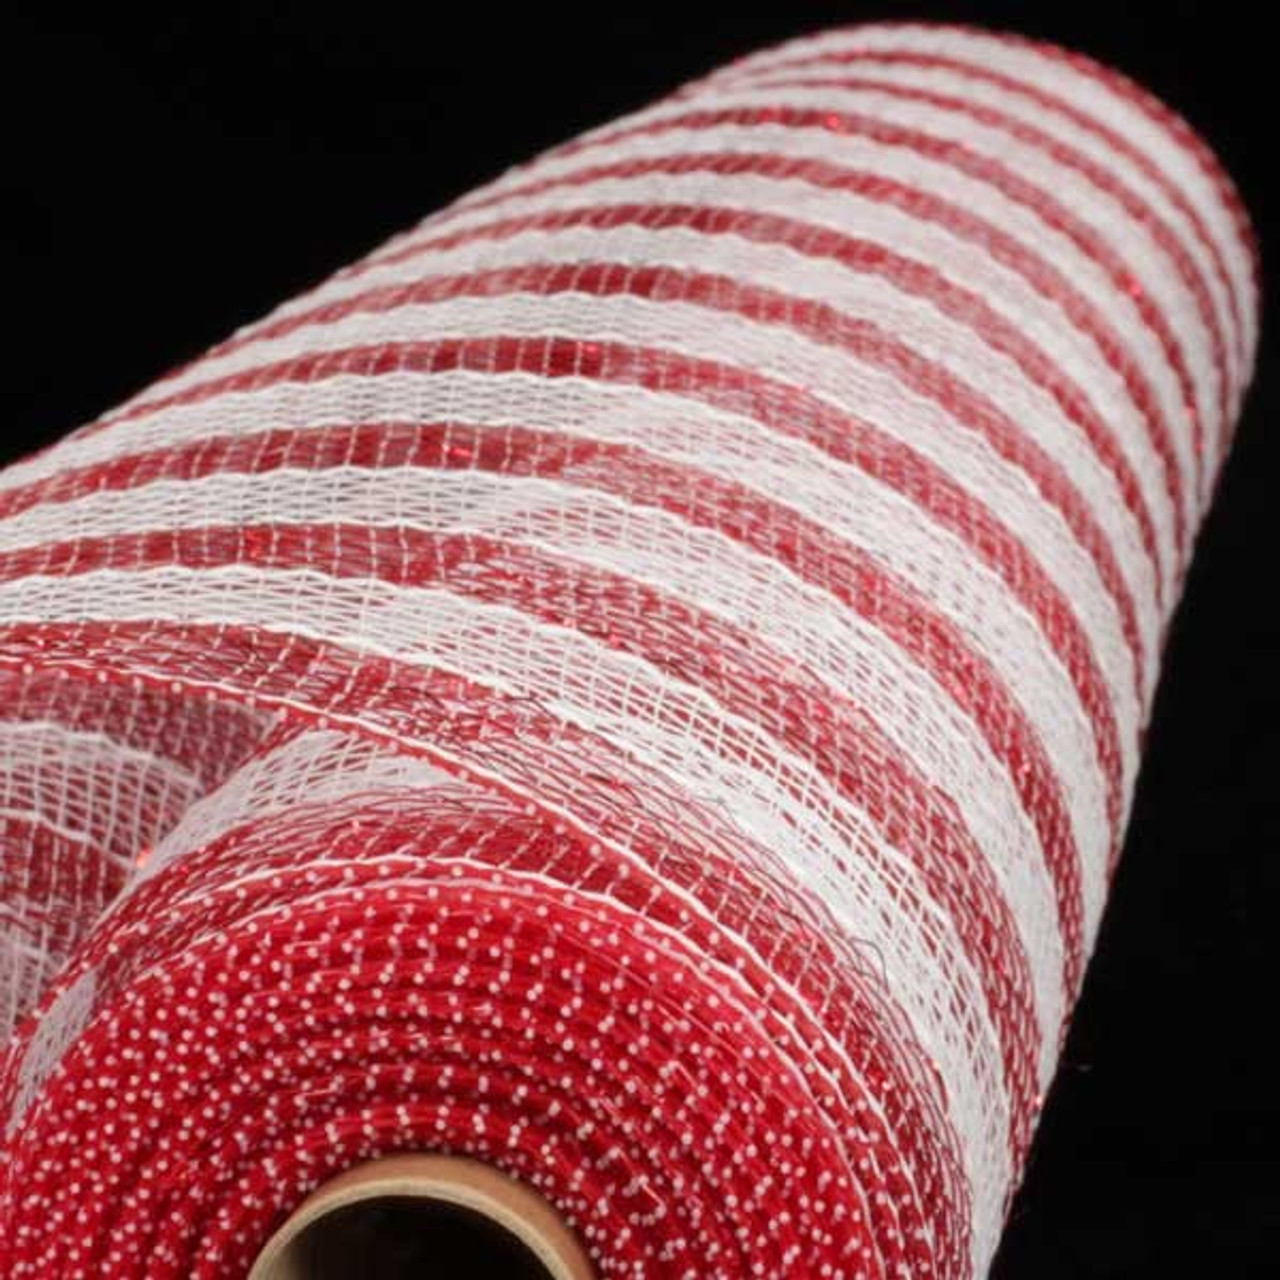 Red, White & Silver Striped Deco Mesh Craft Ribbon 21 x 20 Yards